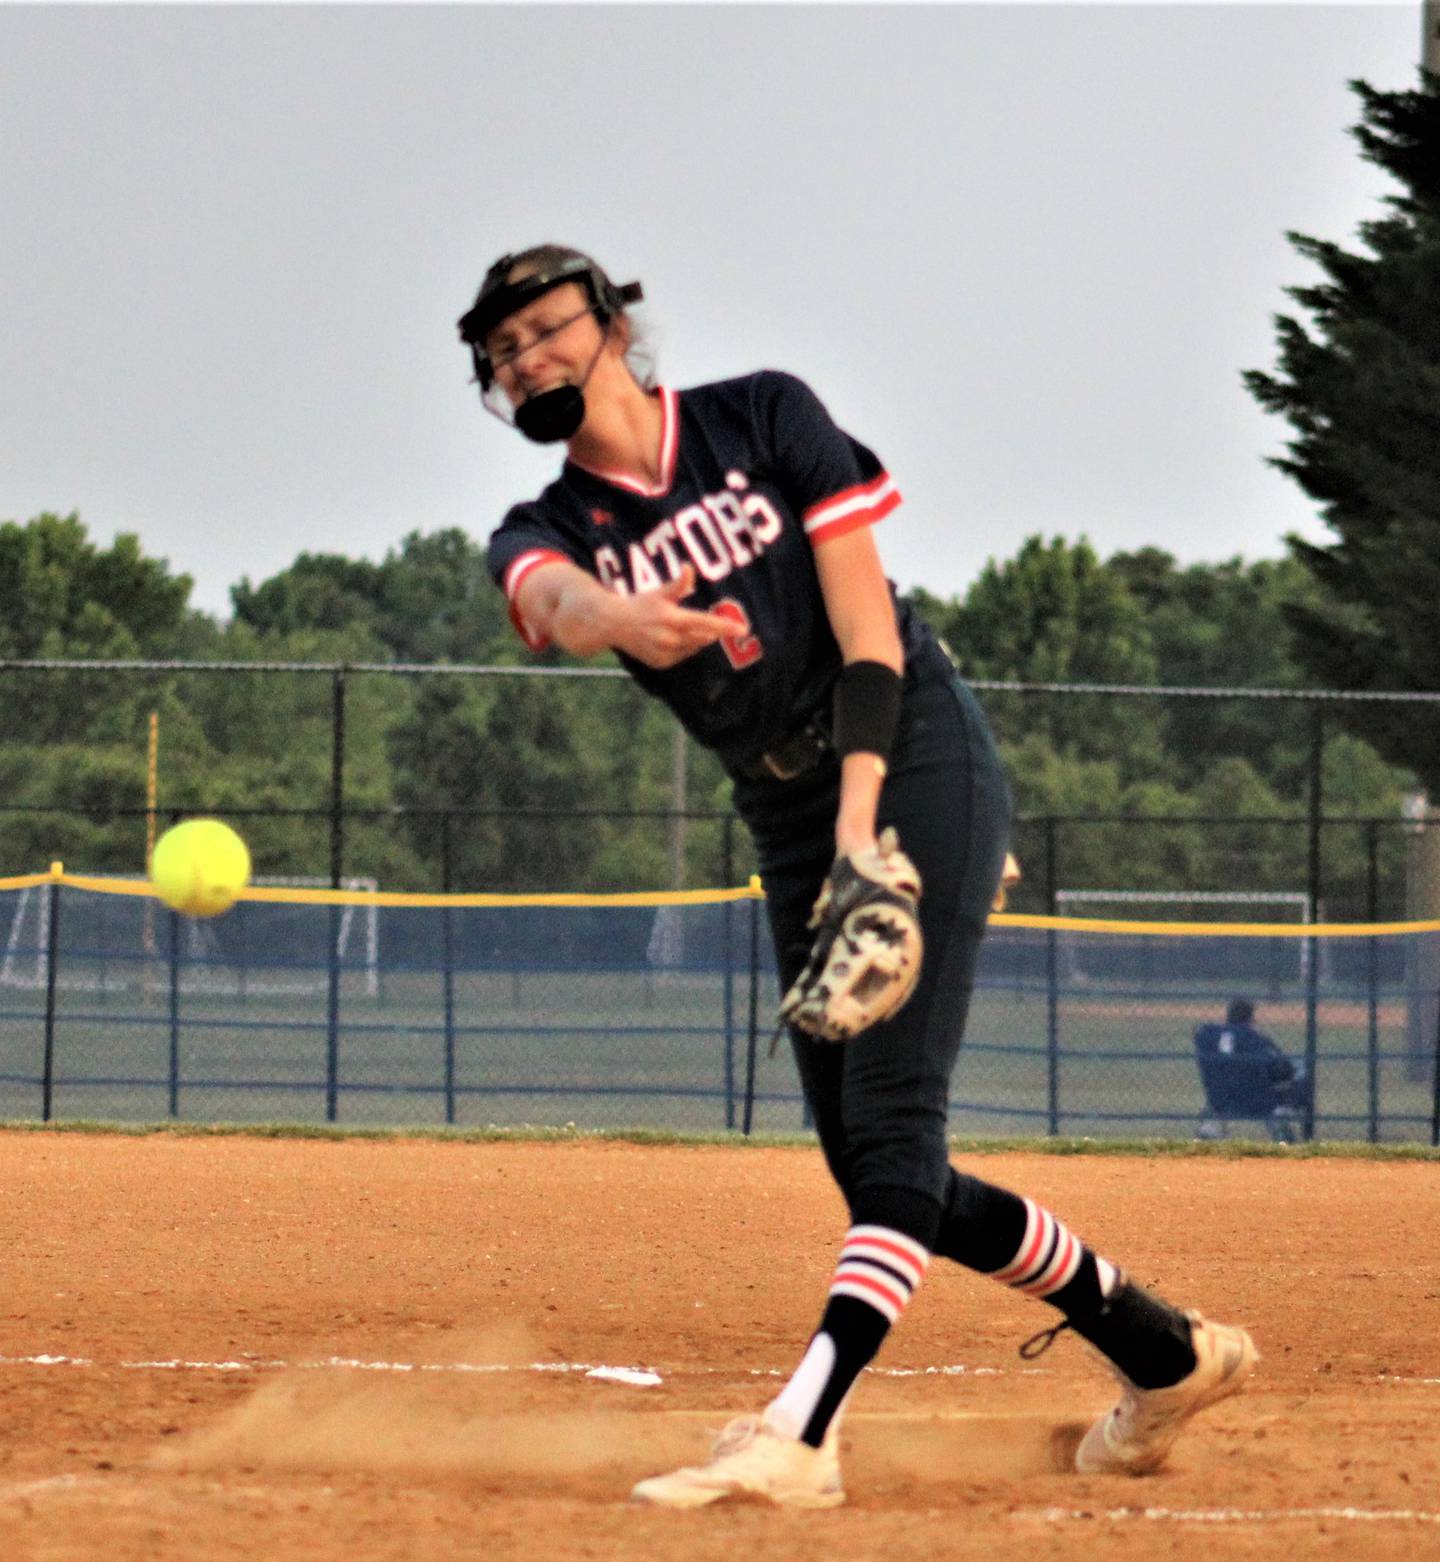 Maggie Frisvold was again domimant for Reservoir softball Tuesday evening. The UMBC recruit pitched a three-hitter and struck out 12 as the top-ranked Gators advanced to the Class 3A state title game with a 4-0 victory over Southern Maryland's Huntingtown in a state semifinal match at Bachmann Park in Glen Burnie.